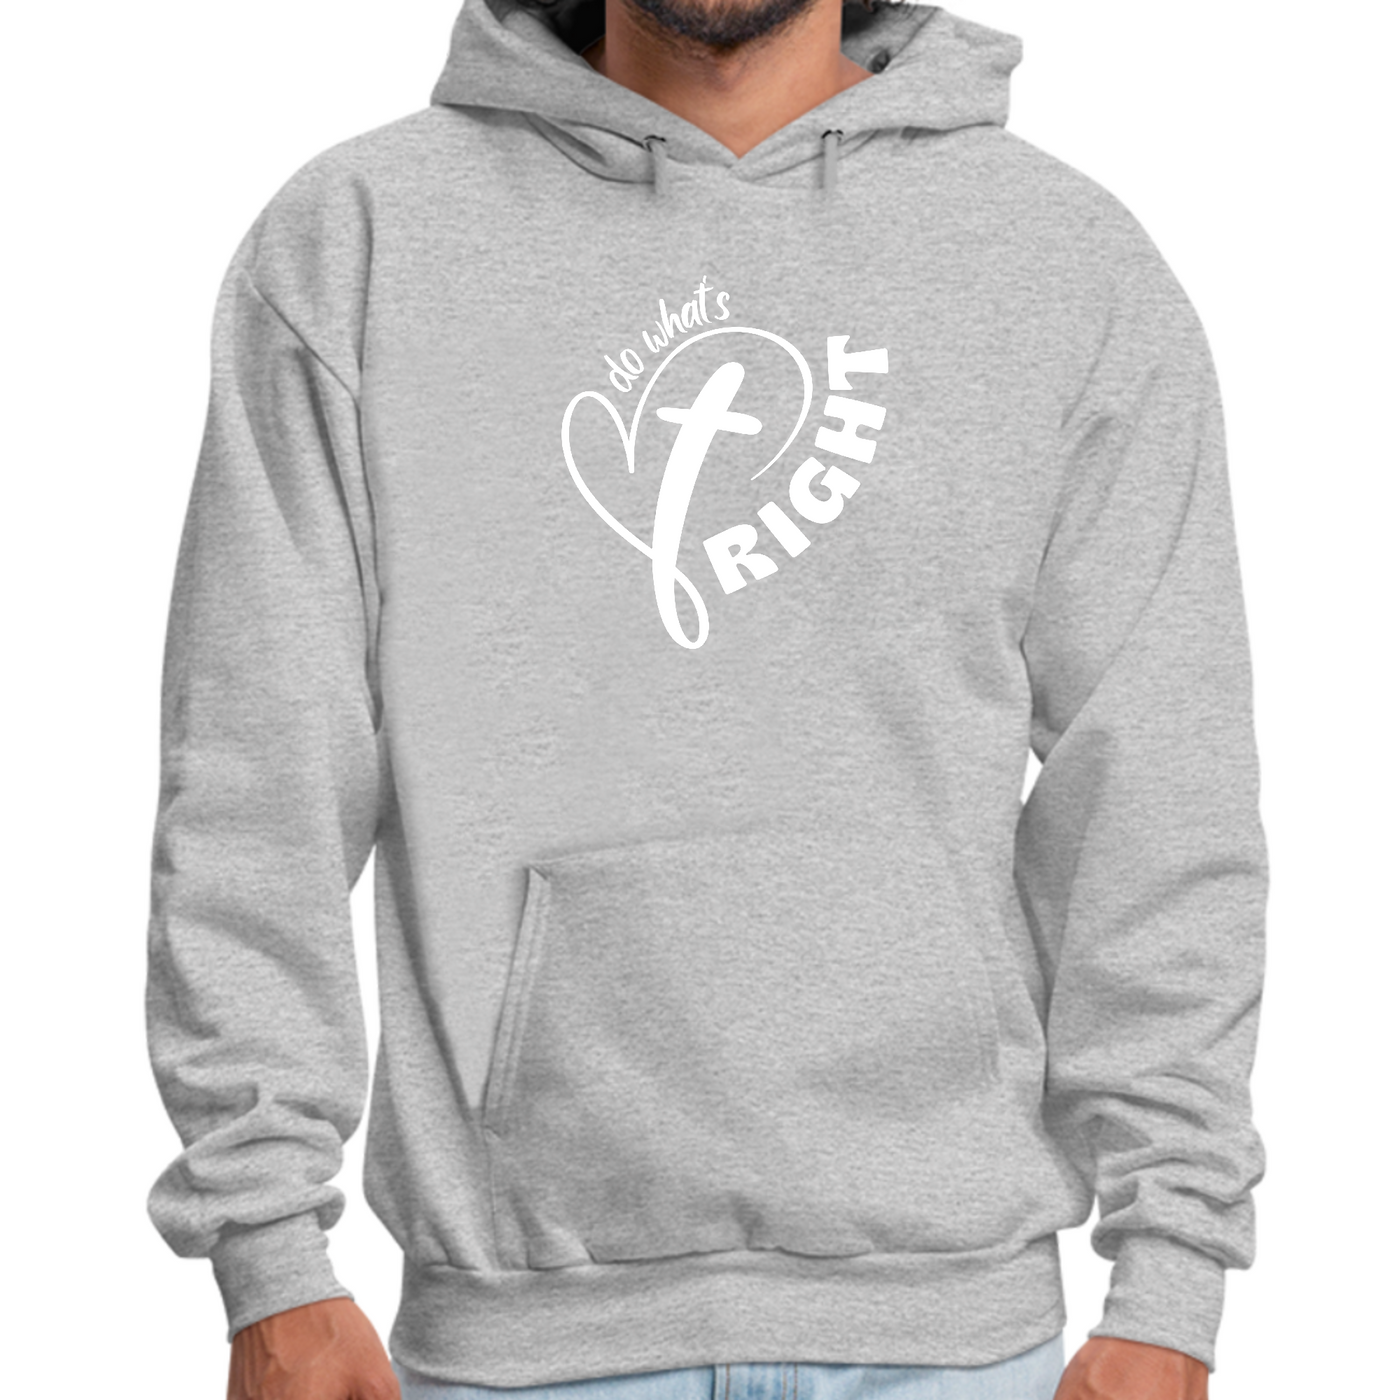 Mens Graphic Hoodie Say It Soul - Do What’s Right - Unisex | Hoodies